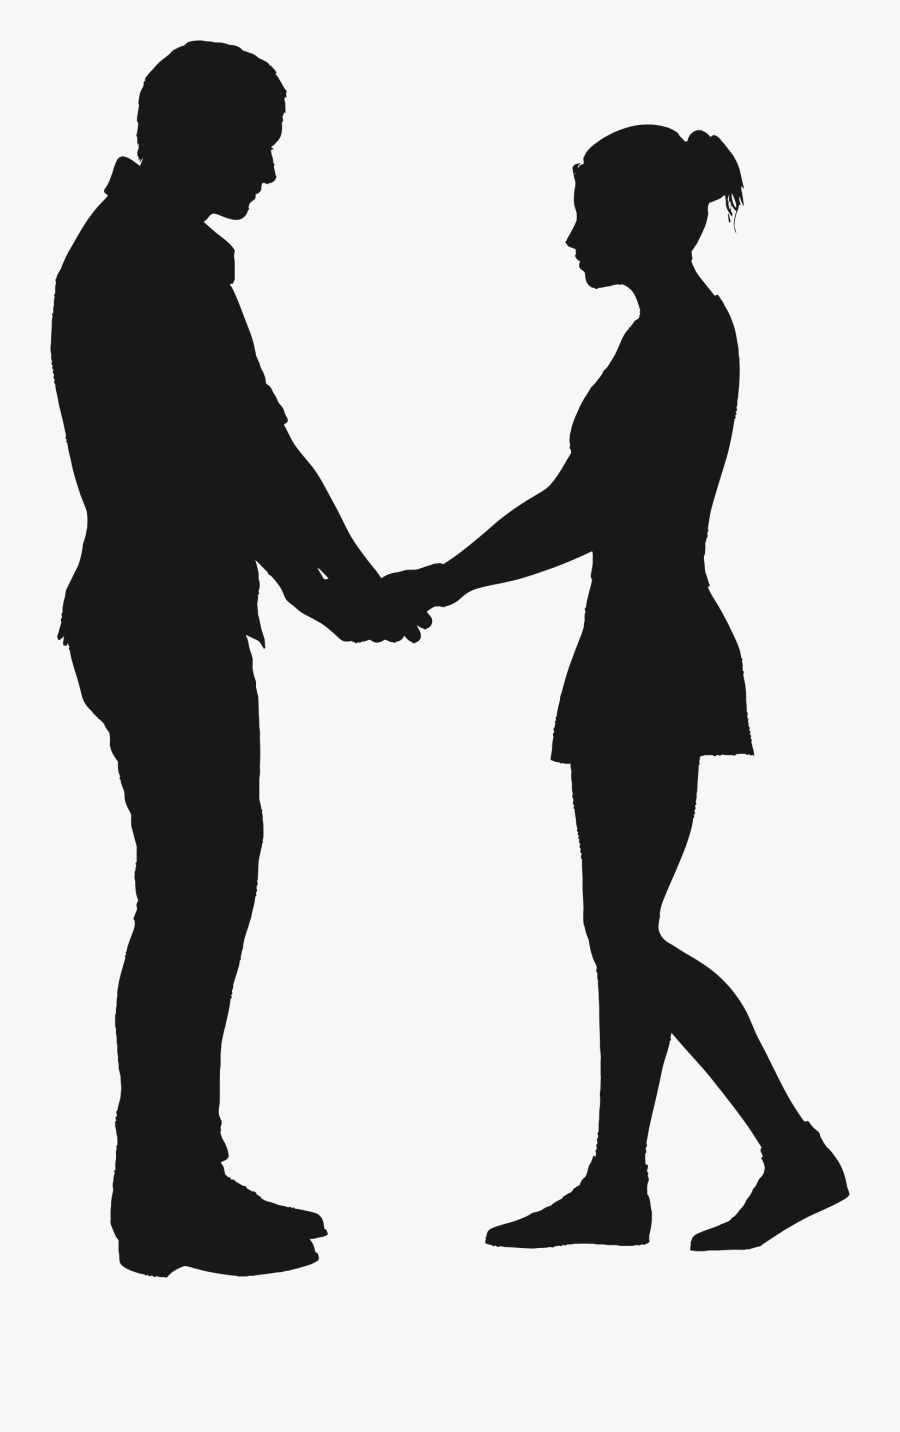 Transparent Holding Hands Clipart - Girl And Boy Silhouette Holding Hands, Transparent Clipart